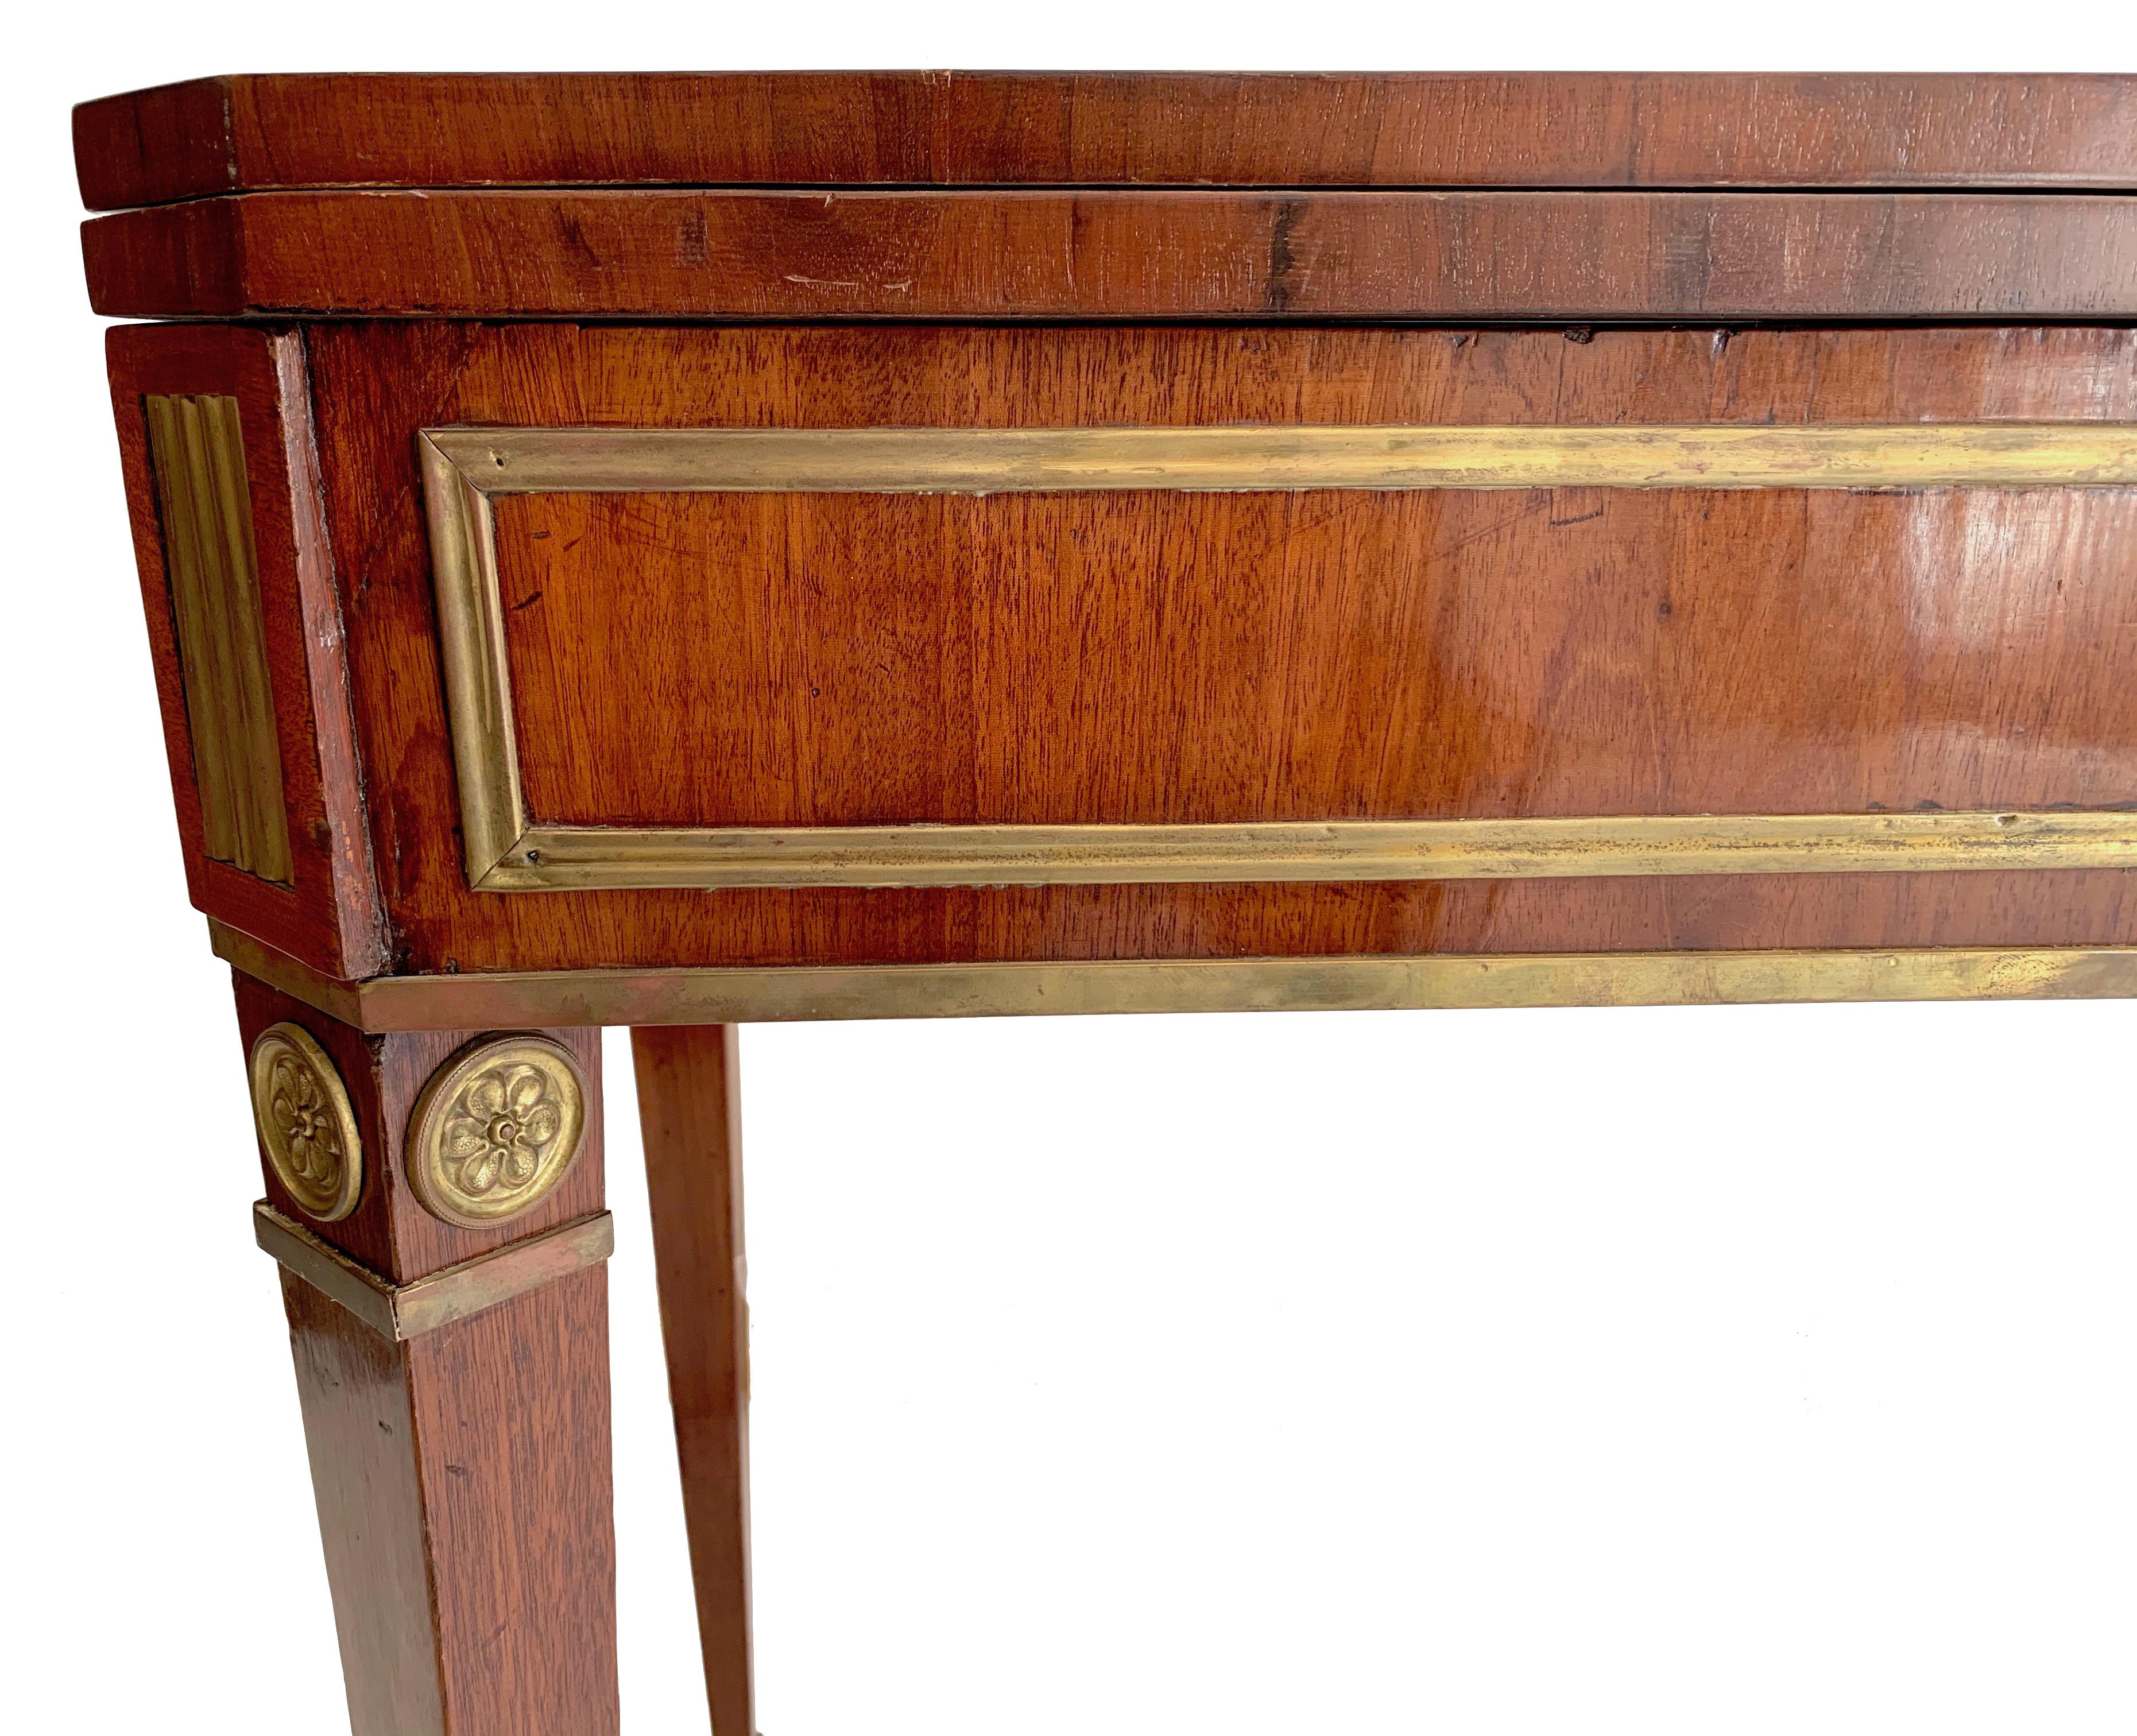 This elegant Russian games and console table was made in st Petersburg circa 1810. It has ben crafted out of mahogany and is decorated with fine brass banding.The table is convertible into a console, then it measures 92 cm in width and 46 cm in